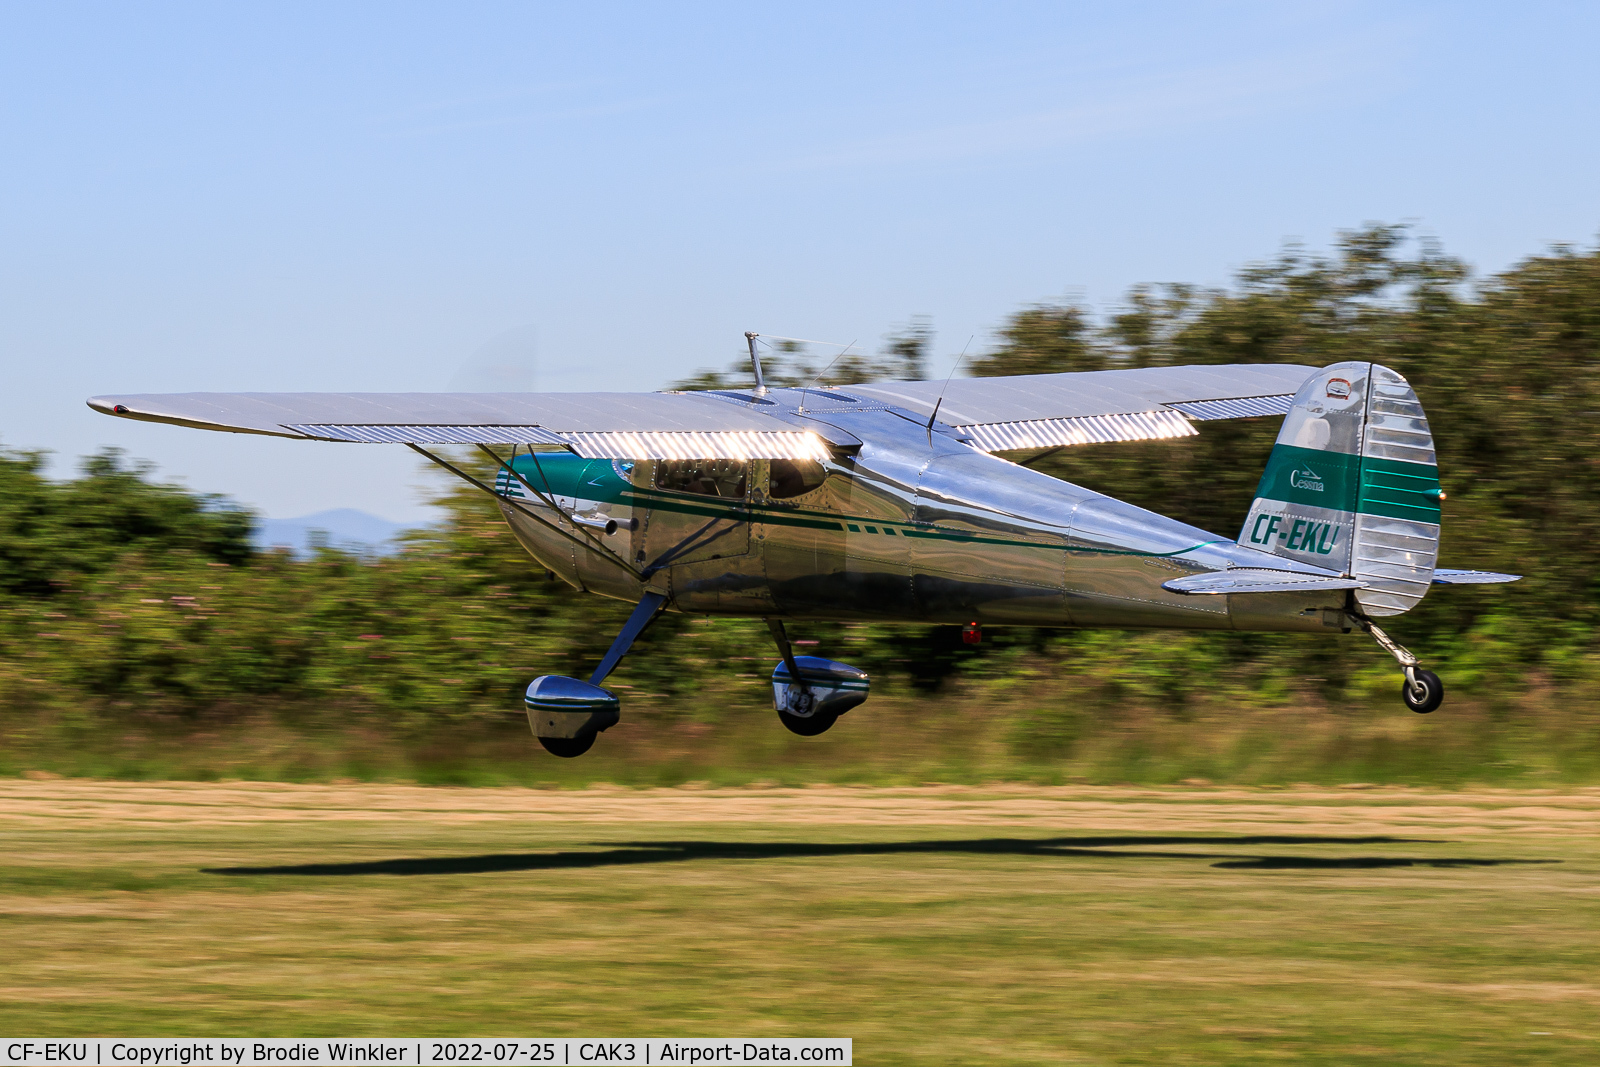 CF-EKU, 1947 Cessna 140 C/N 14027, The flaps catching the light beautifully while departing Delta Heritage Airpark